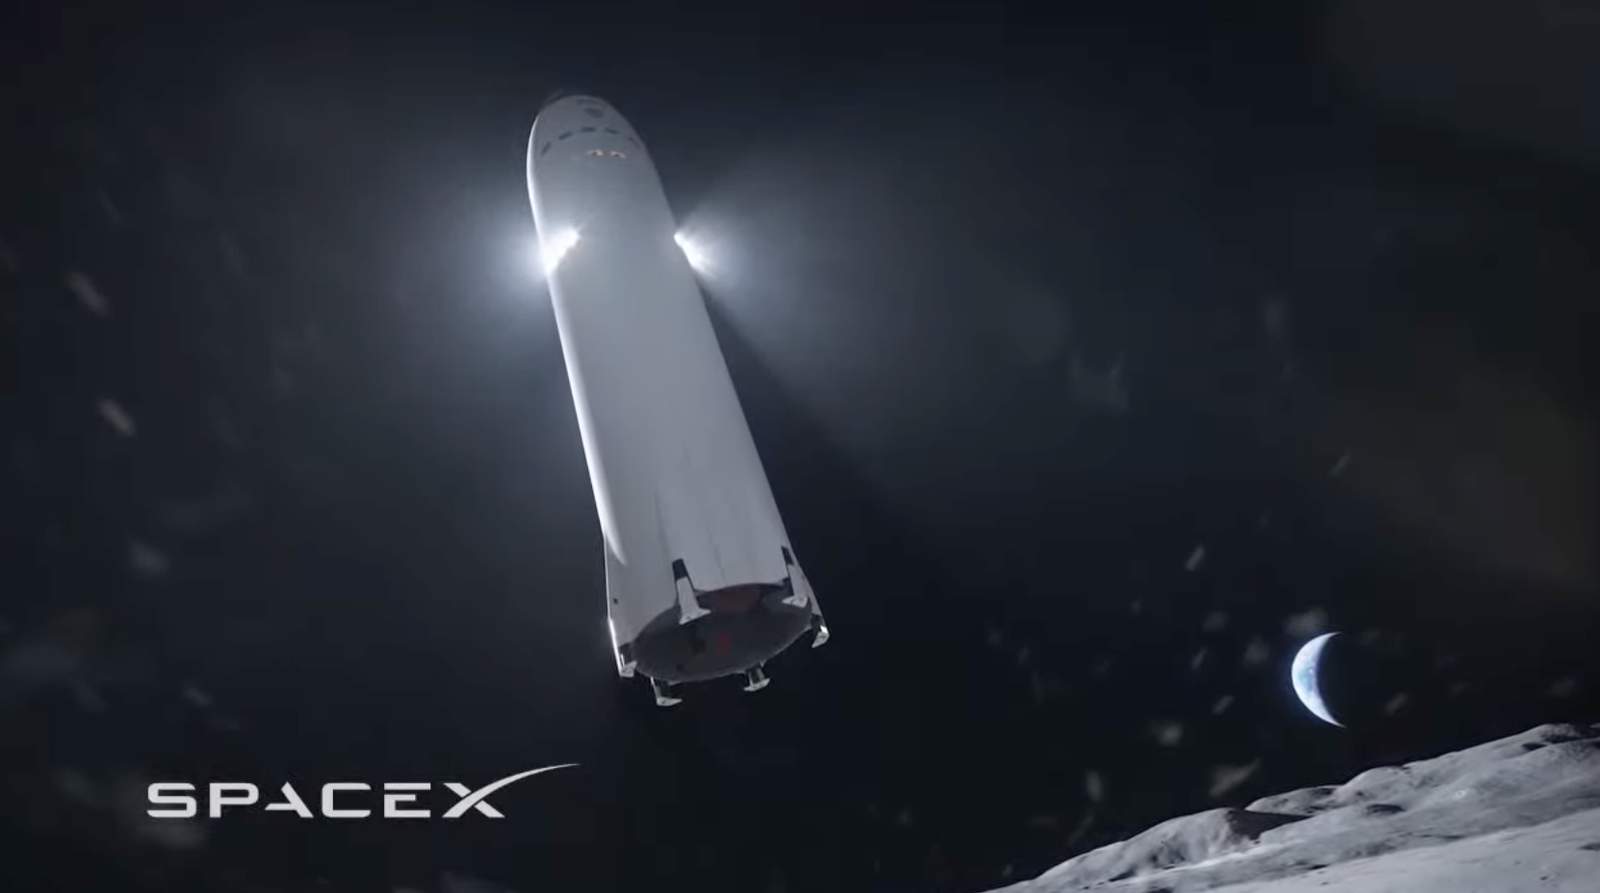 NASA selects SpaceX to develop spacecraft that will land astronauts on moon for first time since 1972